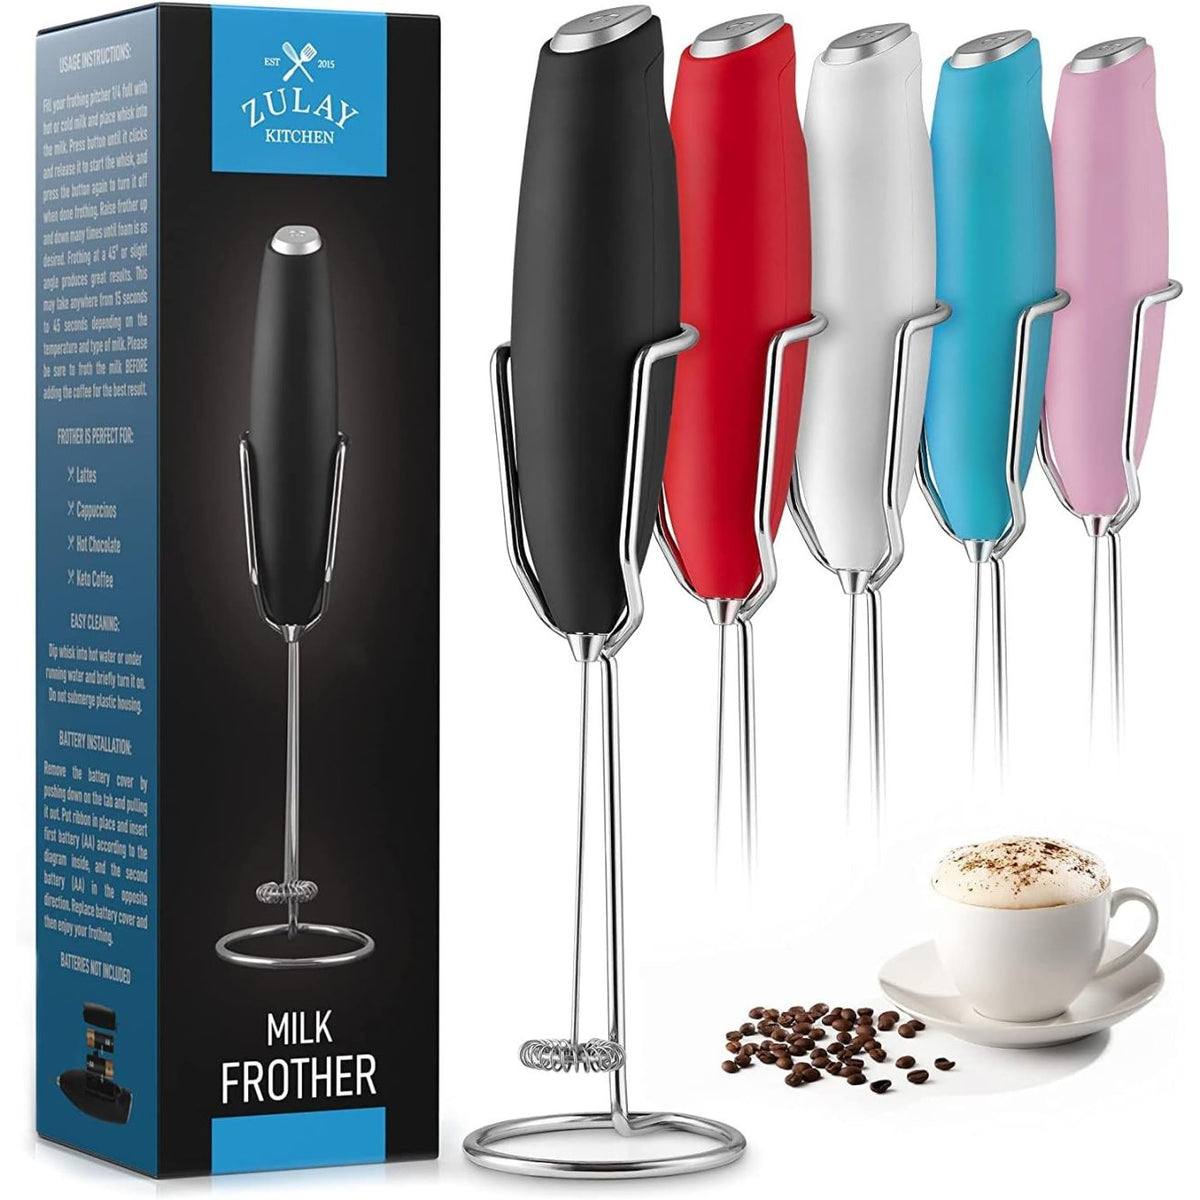 PowerLix Milk Frother Handheld Battery Operated Electric Whisk Foam Maker  For Coffee With Stainless Steel Stand Included - Metallic Black